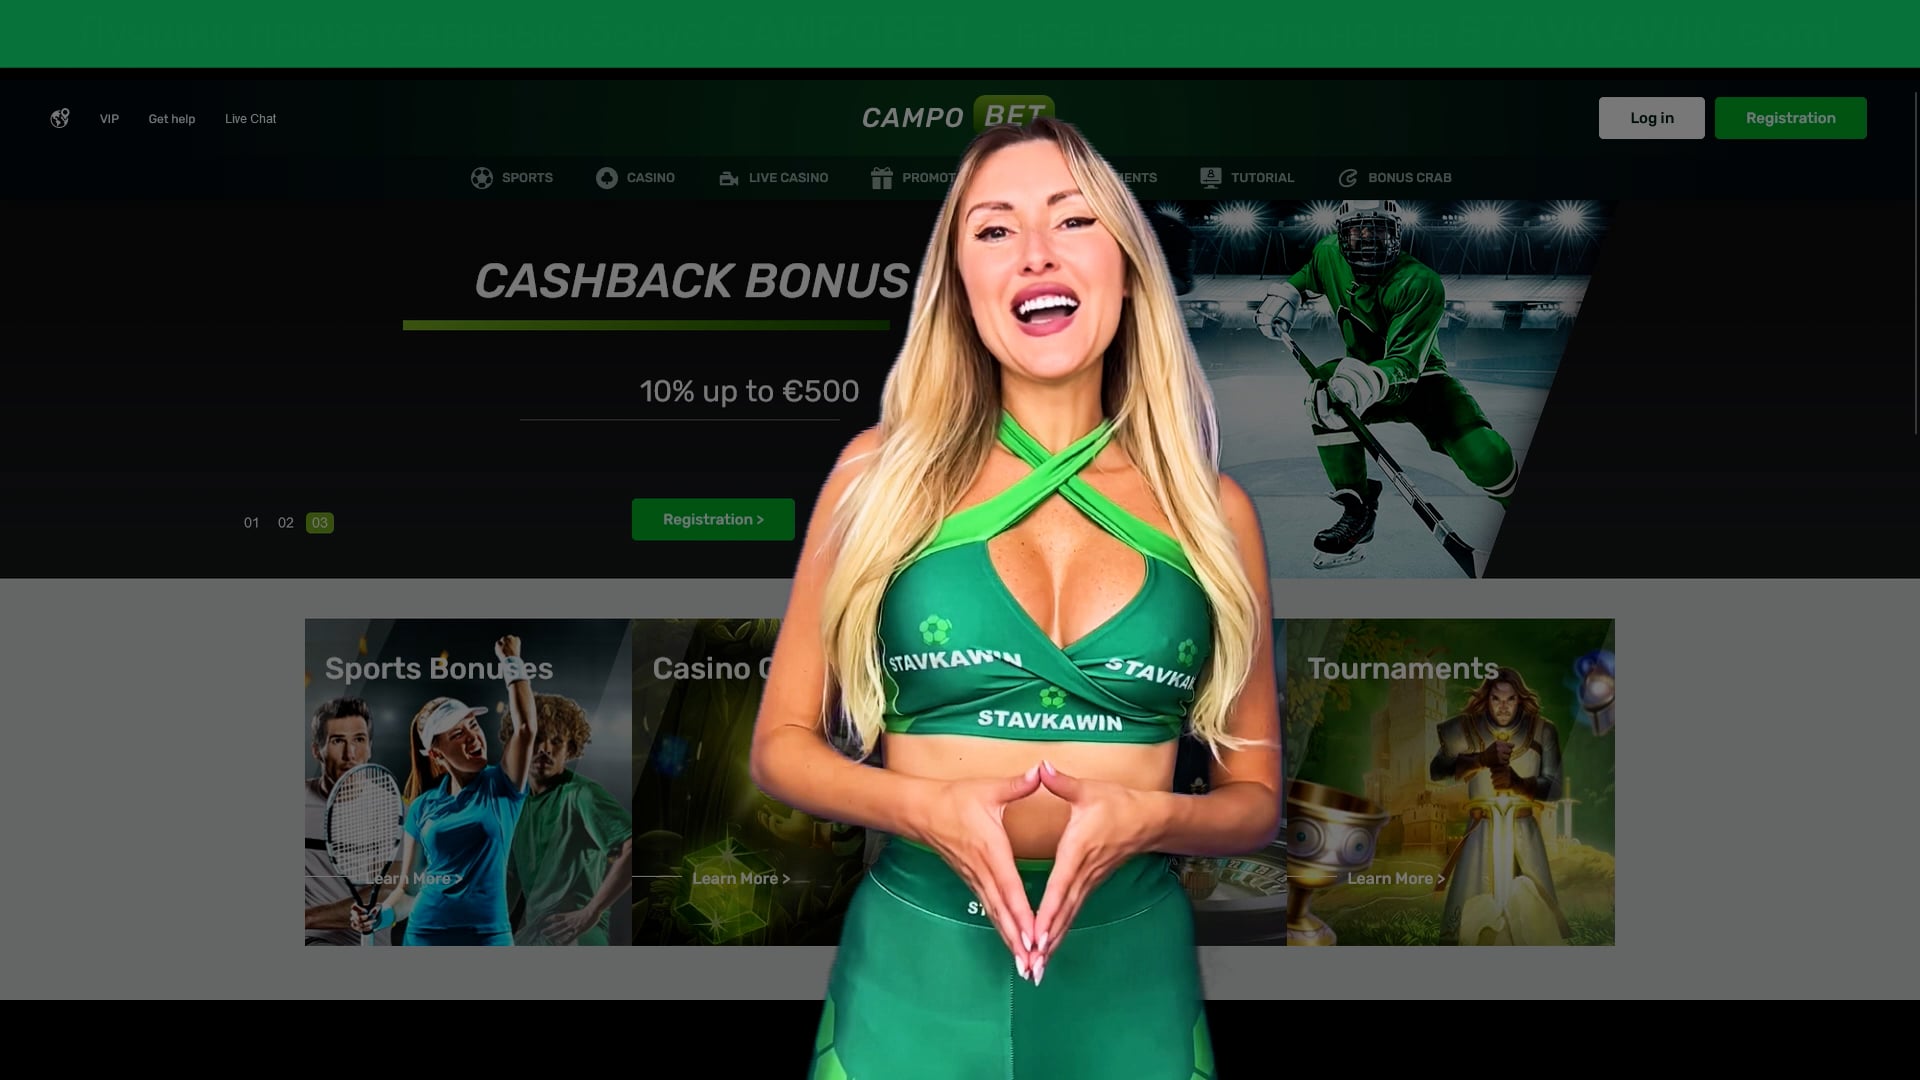 A Beginner's Guide to Campo Bet Online: Everything You Need to Know to Get Started